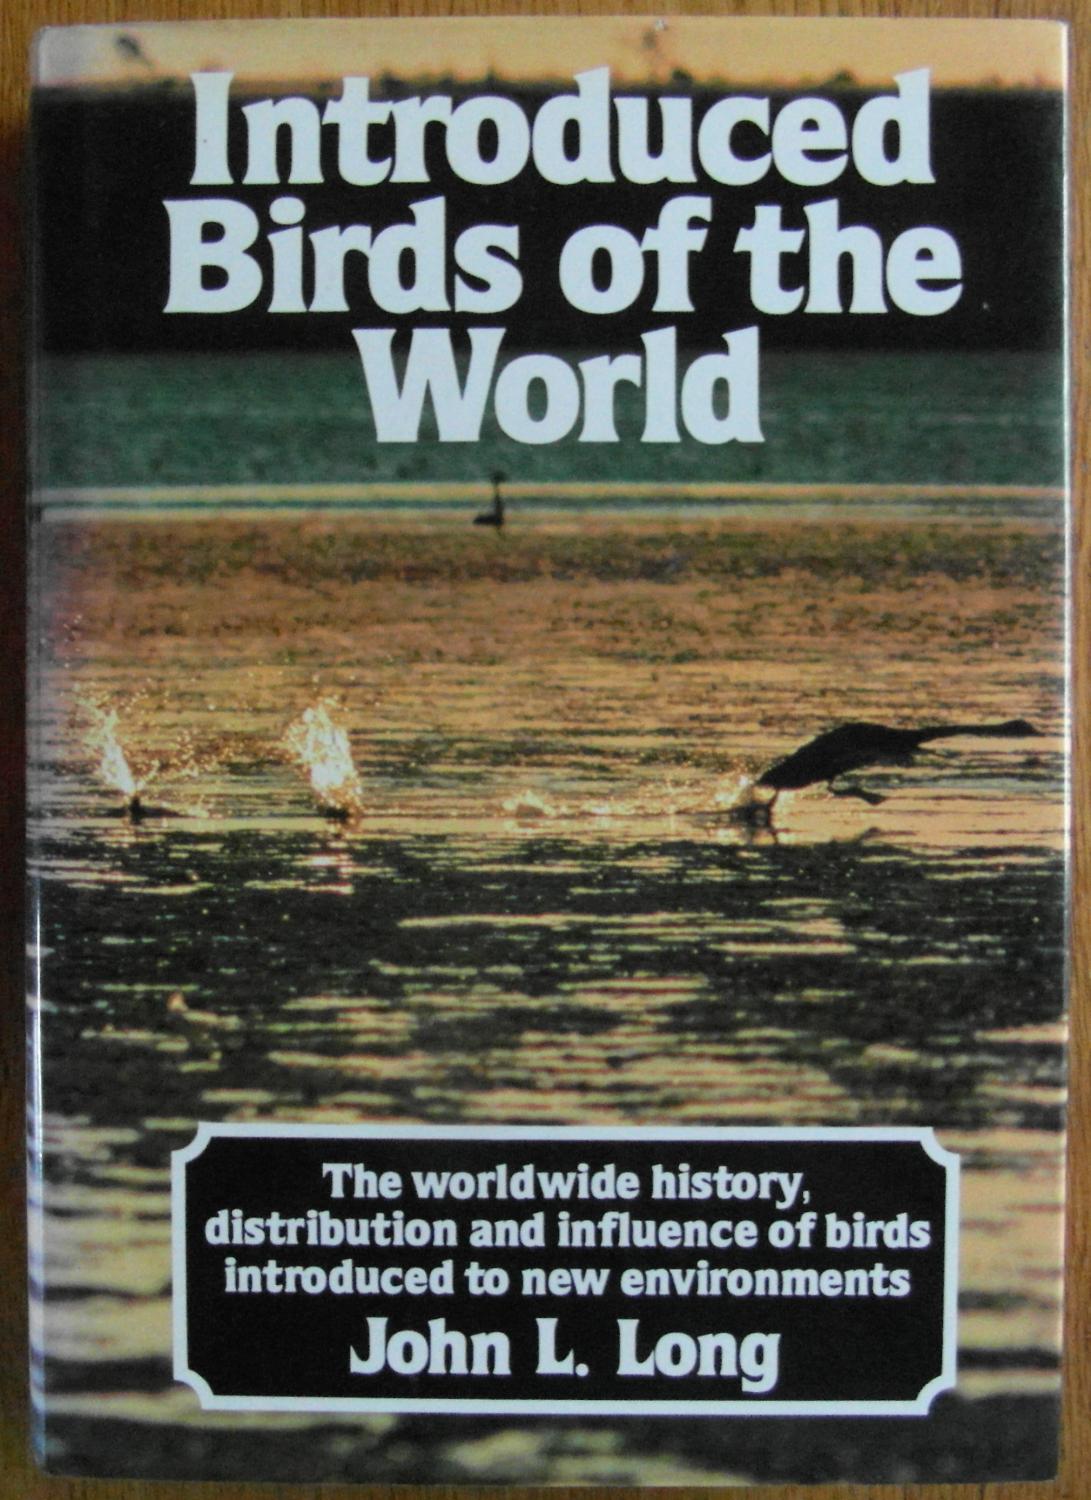 Introduced Birds of the World: Worldwide History, Distribution and Influence of Birds Introduced to New Environments